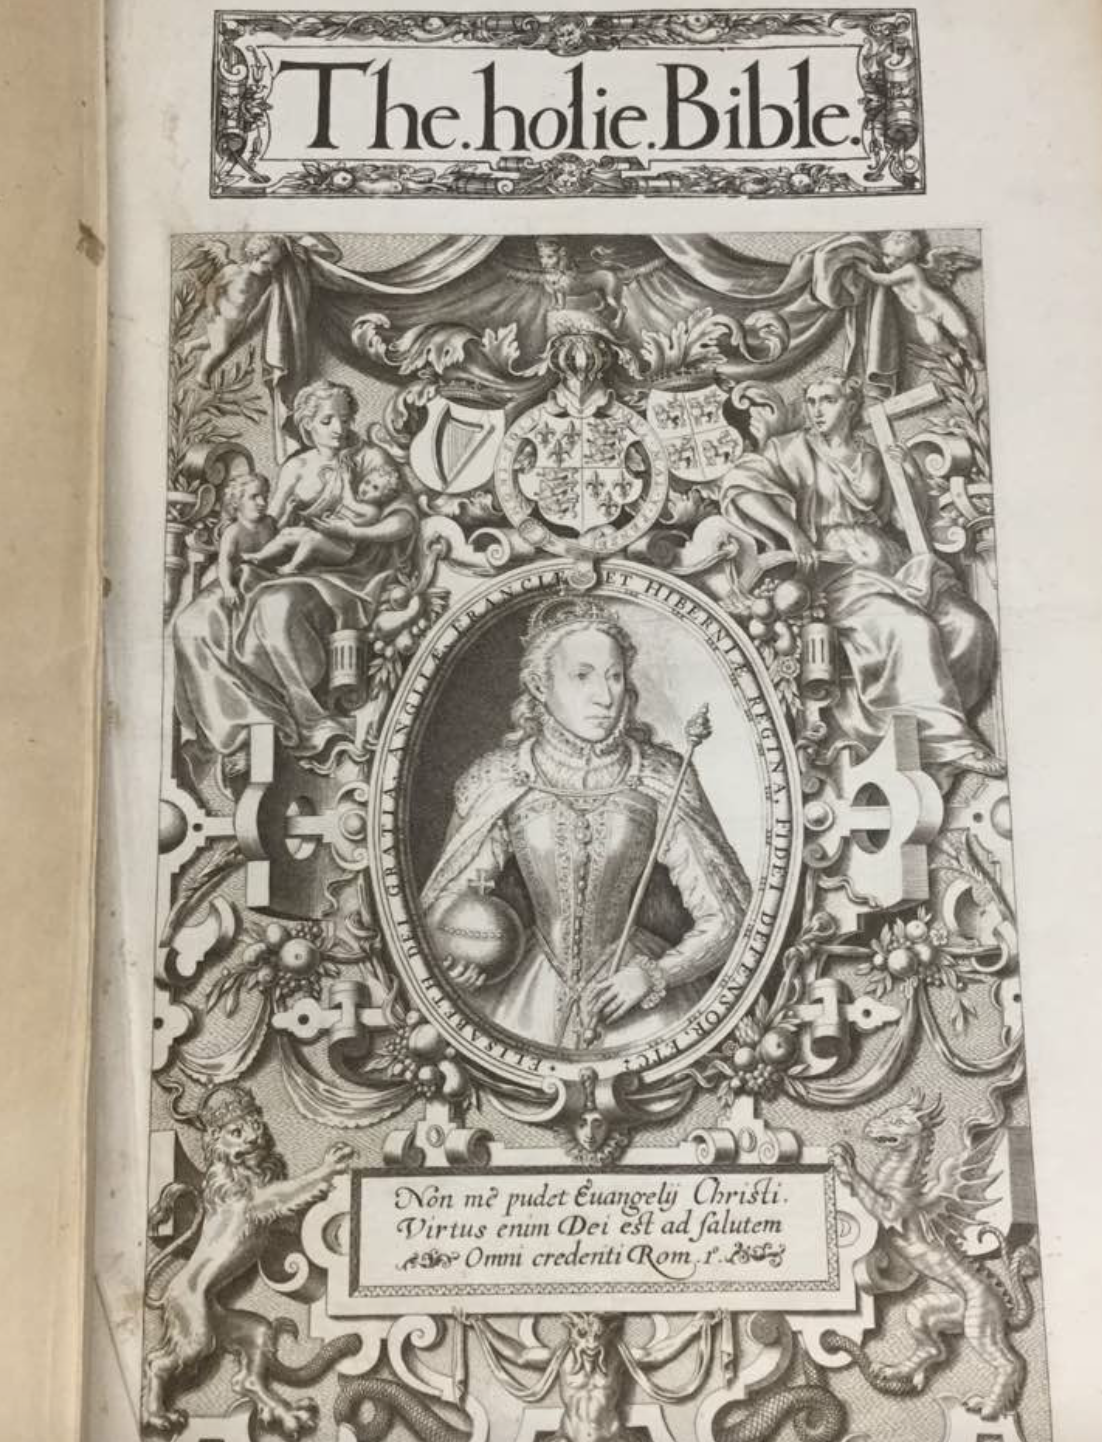 Image of title page of 1572 English Bible with illustration of Queen Elizabeth